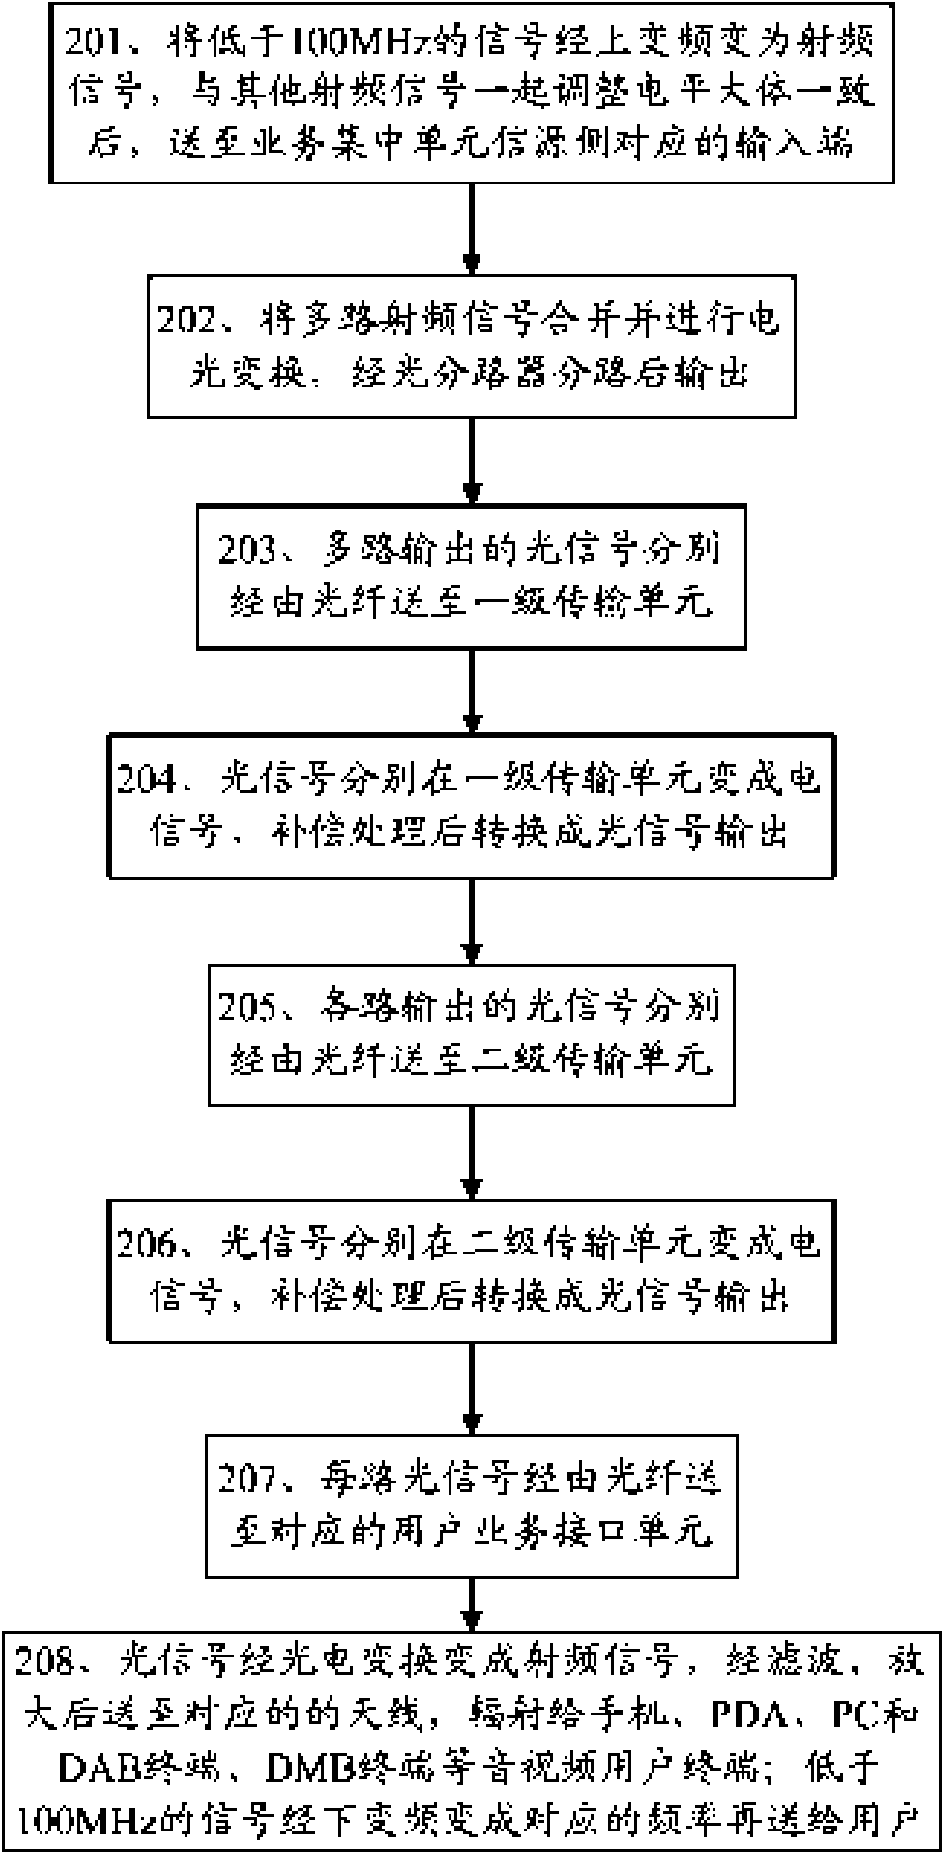 Method for implementing access and distribution of digital audio/video signal in premise access network